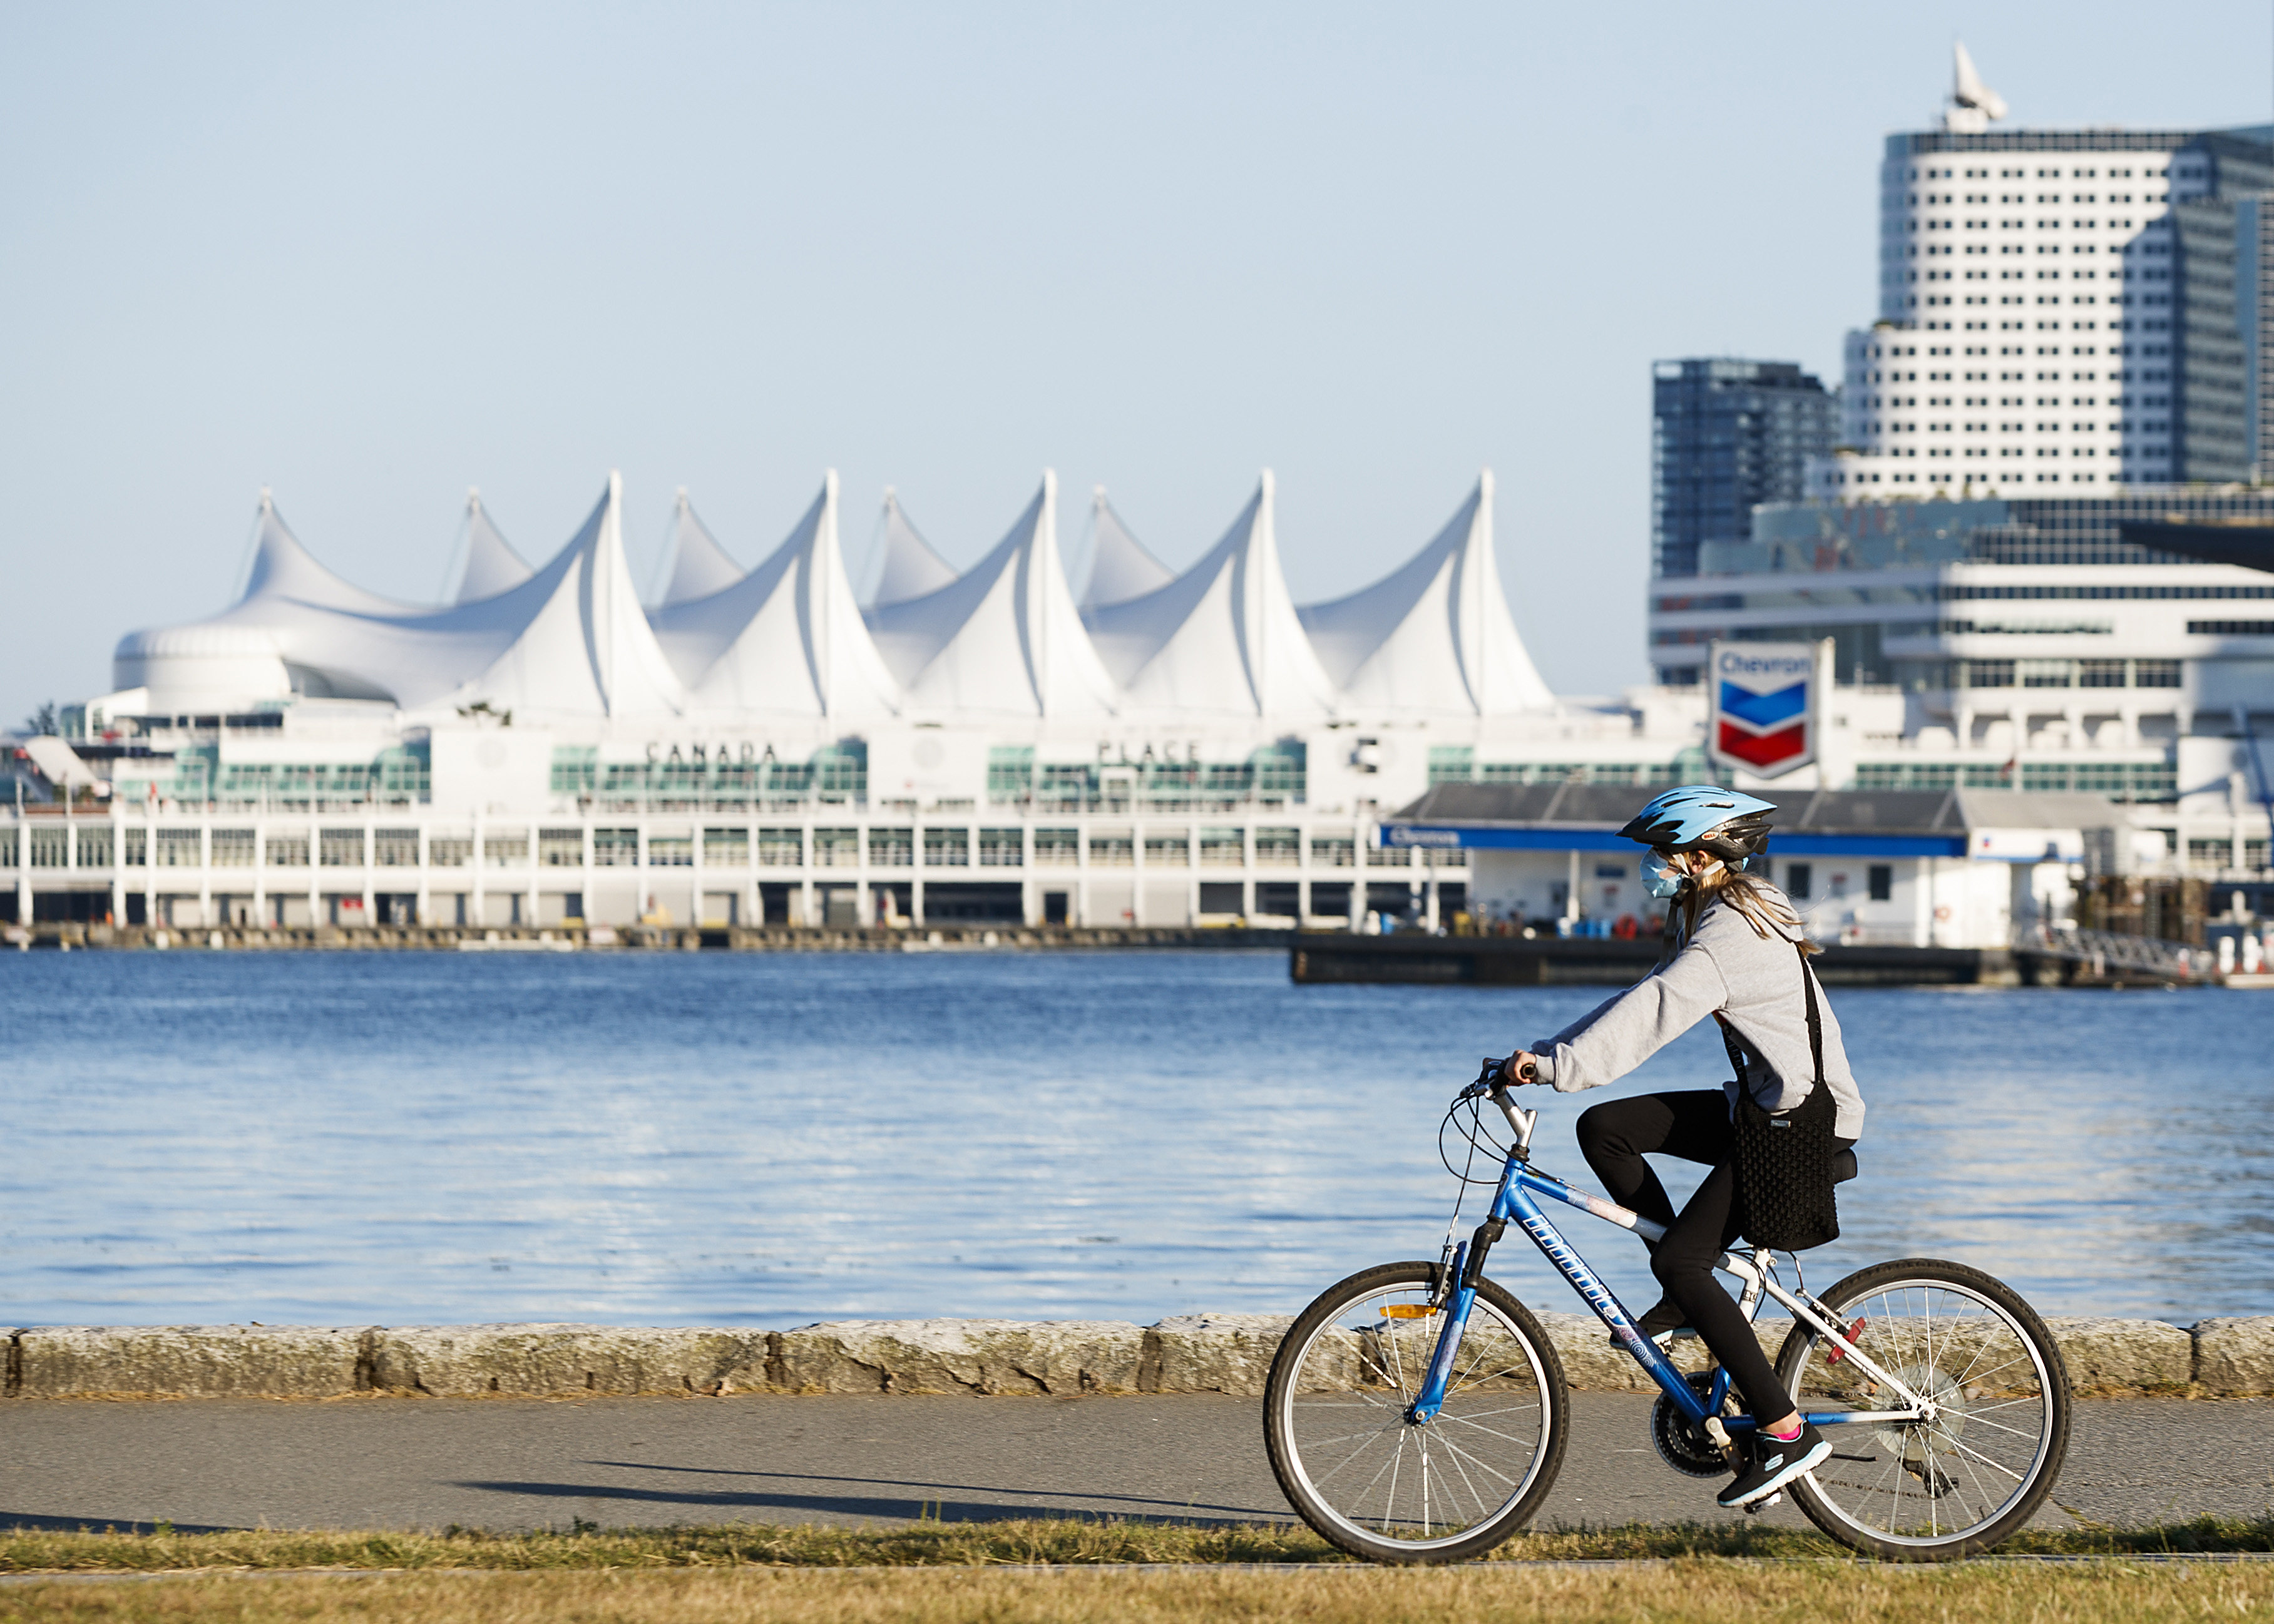 As Covid-19 restrictions ease around the world, Asian-Canadian millennials talk about their future travel plans. Above: a woman cycles along the seawall at Stanley Park in Vancouver, Canada. Photo: Andrew Chin/Getty Images